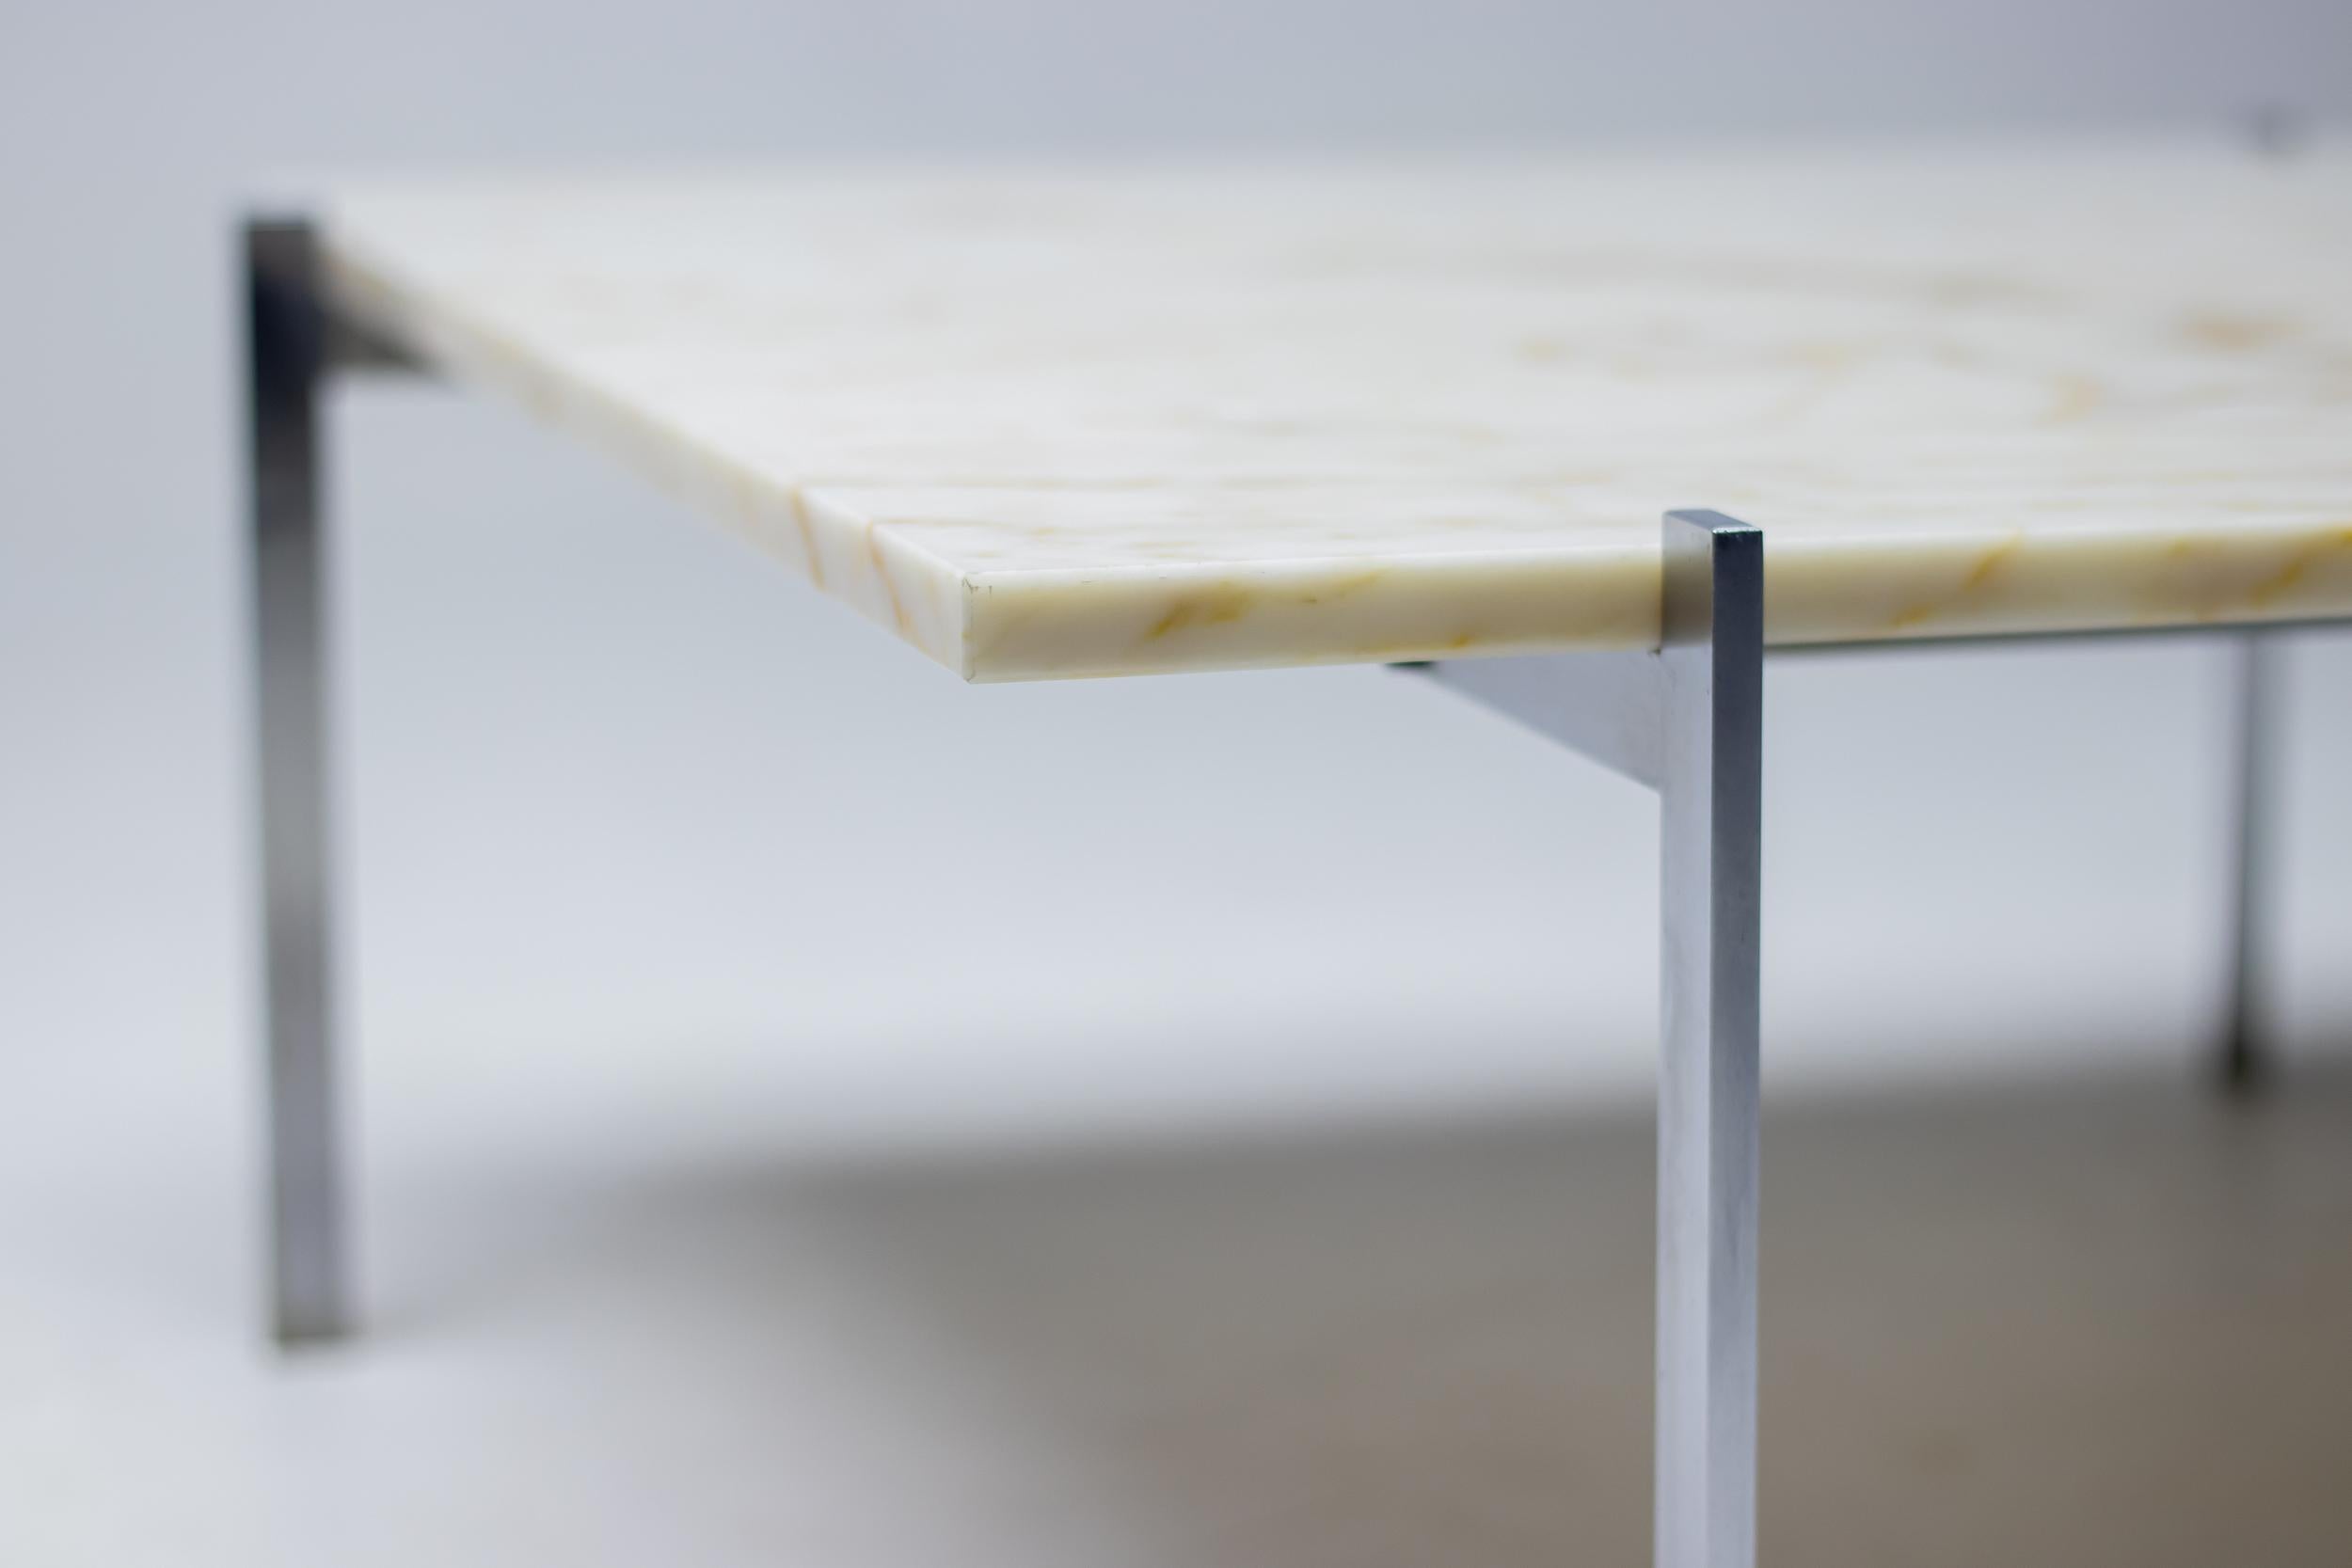 Poul Kjærholm for E. Kold Christensen PK61 occasional table, white marble and steel, made in Denmark, designed in 1955. 
Marked with E. Kold Christensen logo in the frame.

This table by Kjærholm is the epitome of minimalistic yet monumental